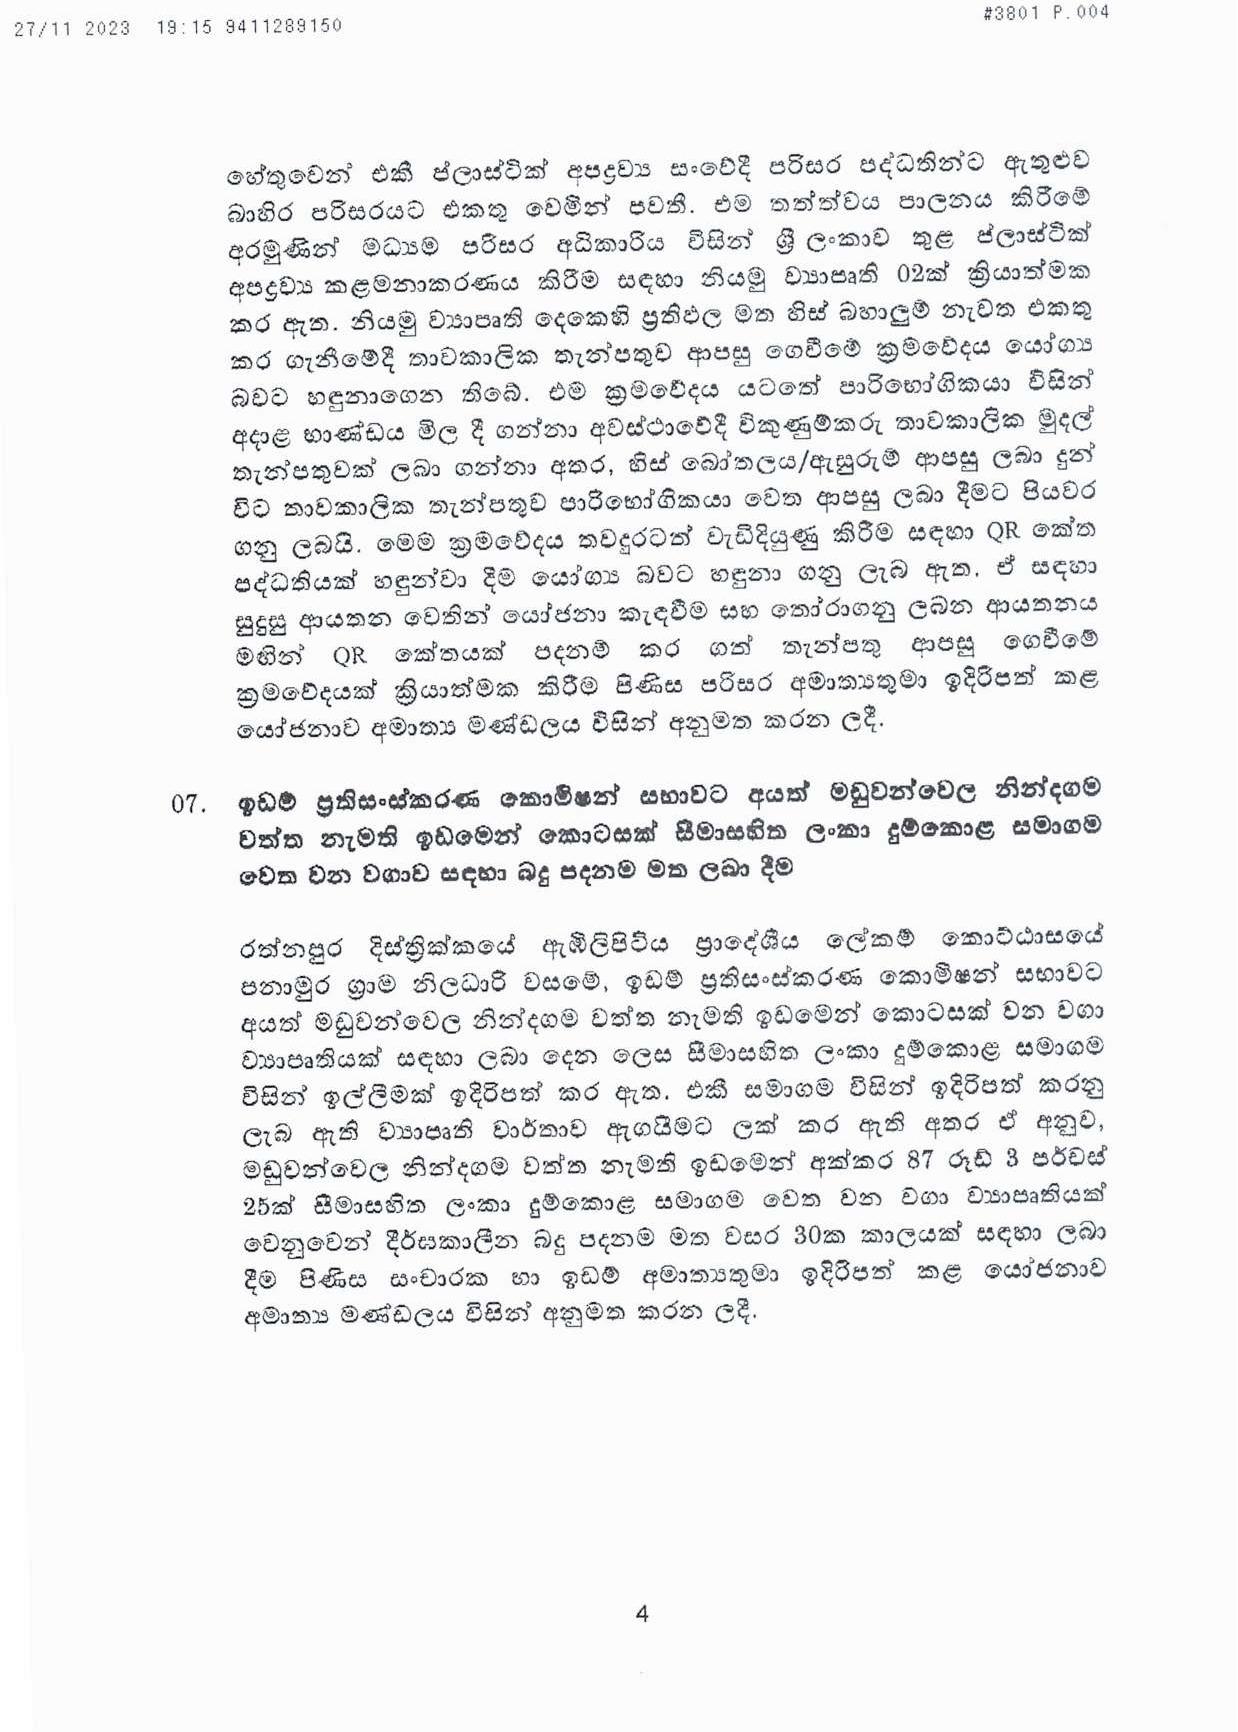 Cabinet Decision on 27.11.2023 page 004